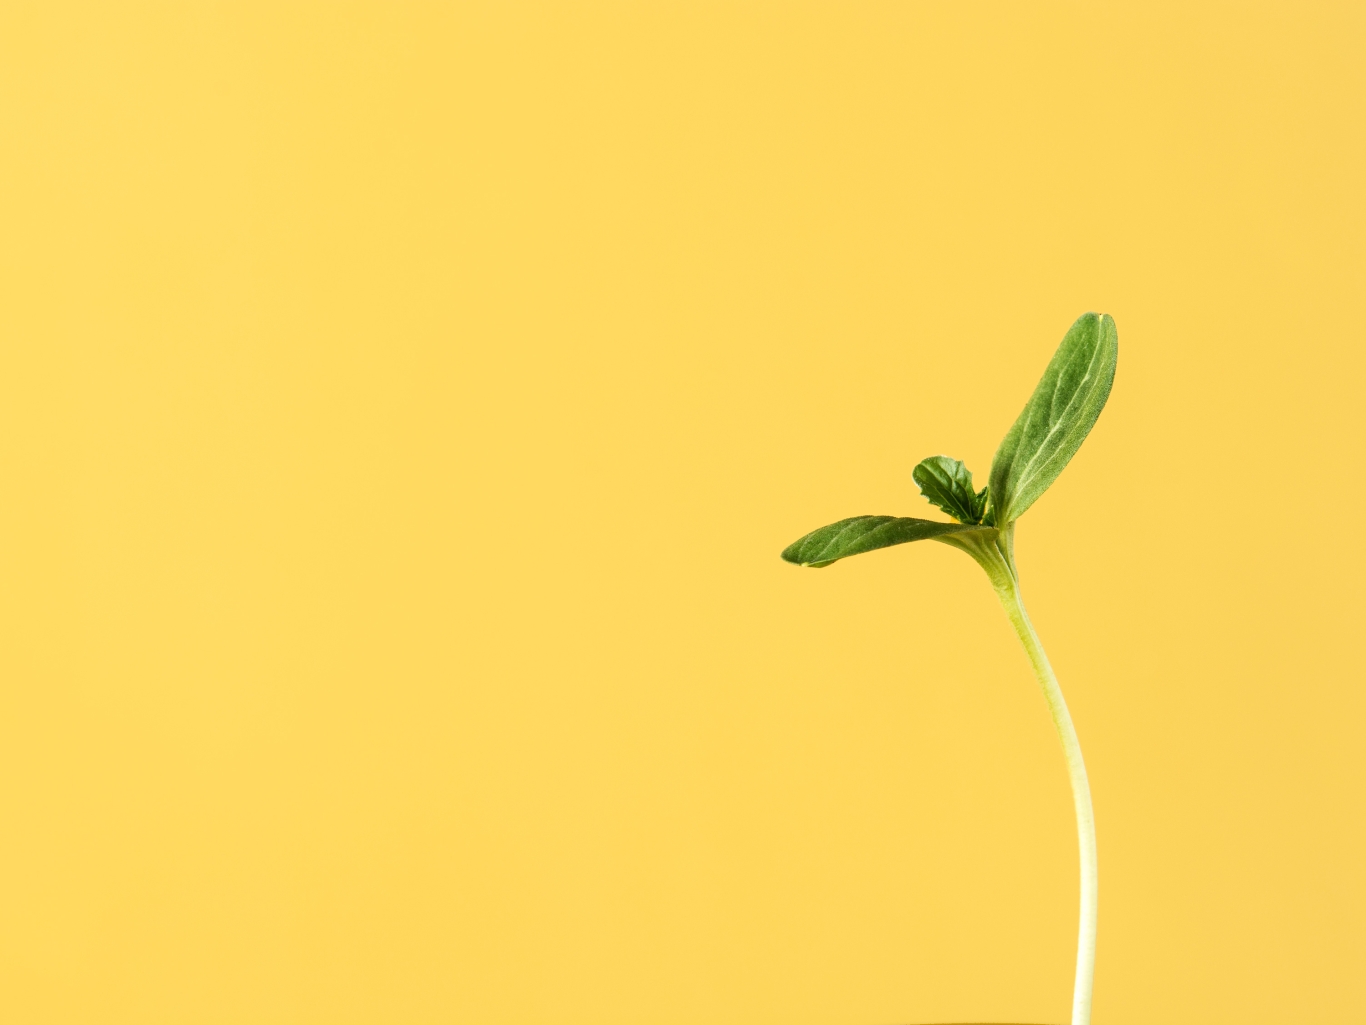 Plant seeding growing on yellow background.